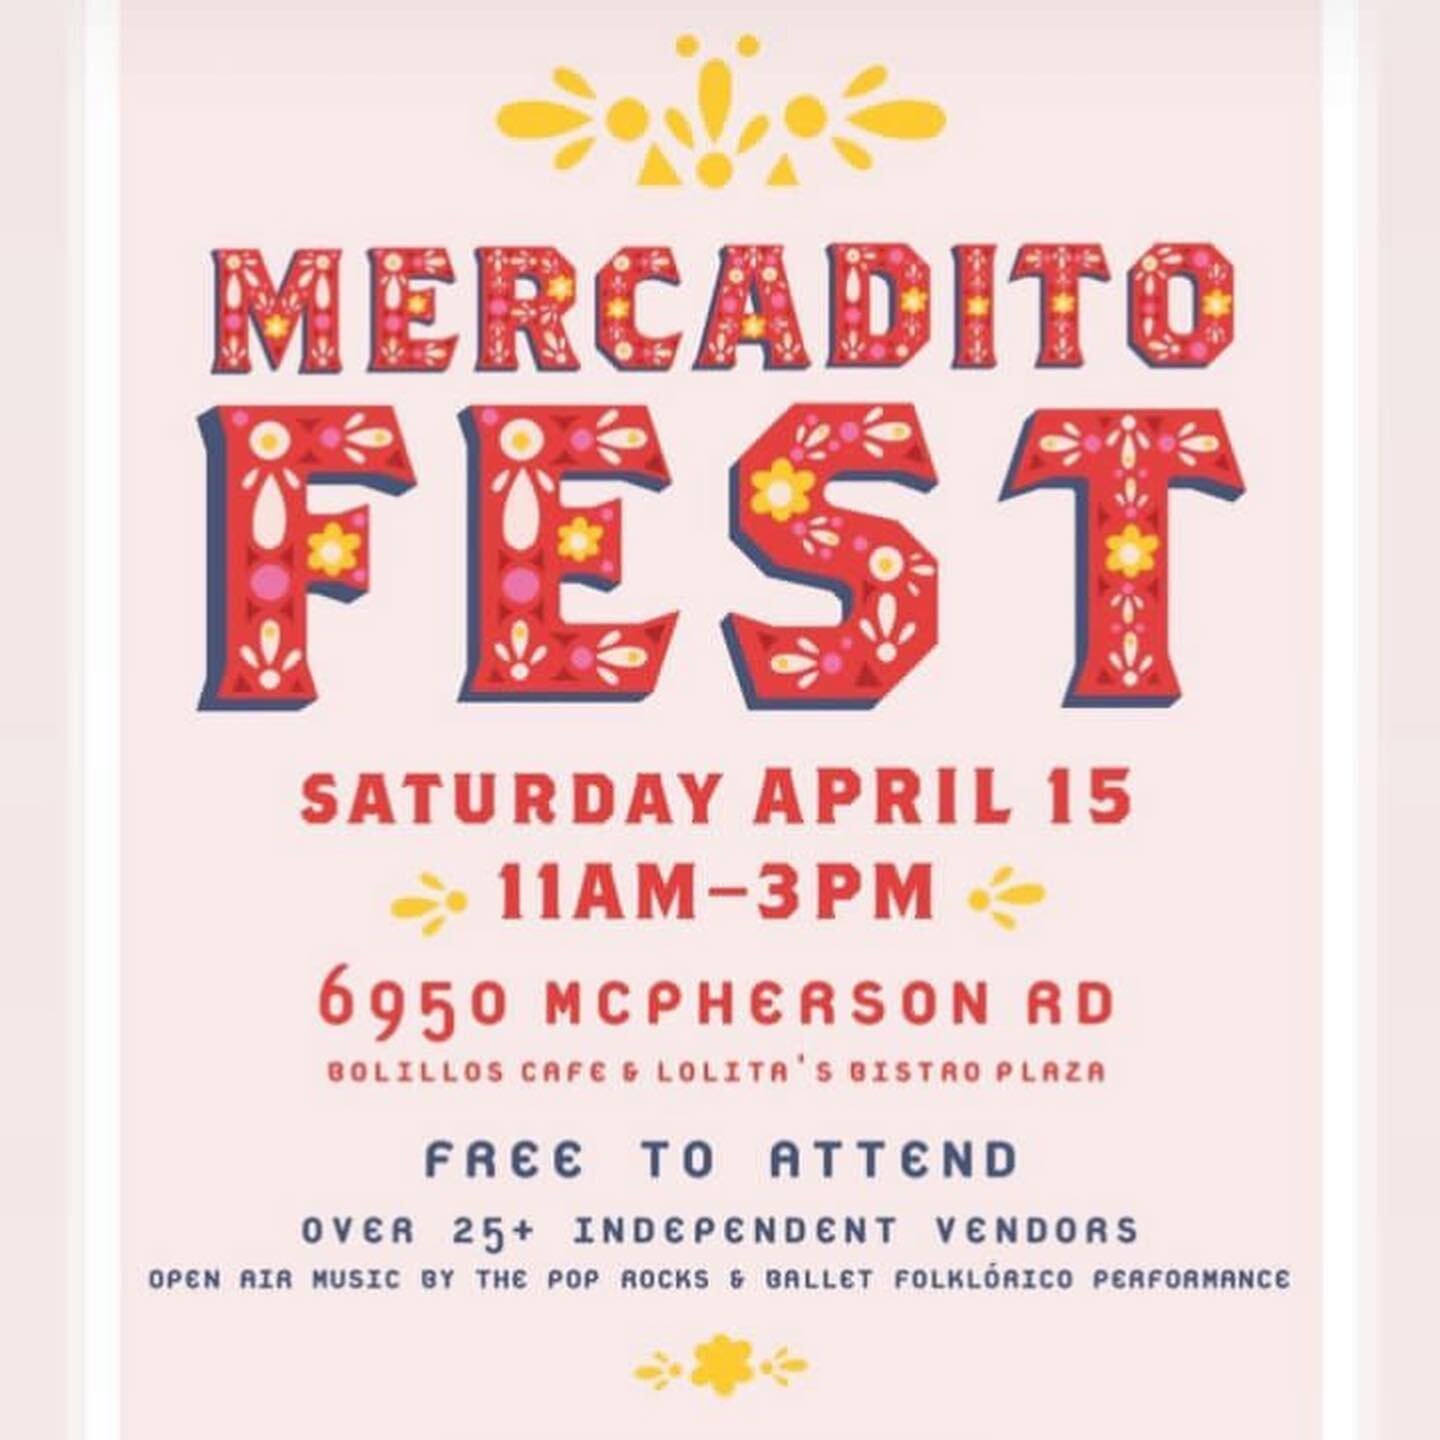 Hey Laredo! It&rsquo;s been a while since I&rsquo;ve set up in town. @juanjalapena and I will be sharing a booth tomorrow at @mercaditofest from 11-3pm. Come hang out, check out the new work we&rsquo;ve made, and grab something if you wanna save on s